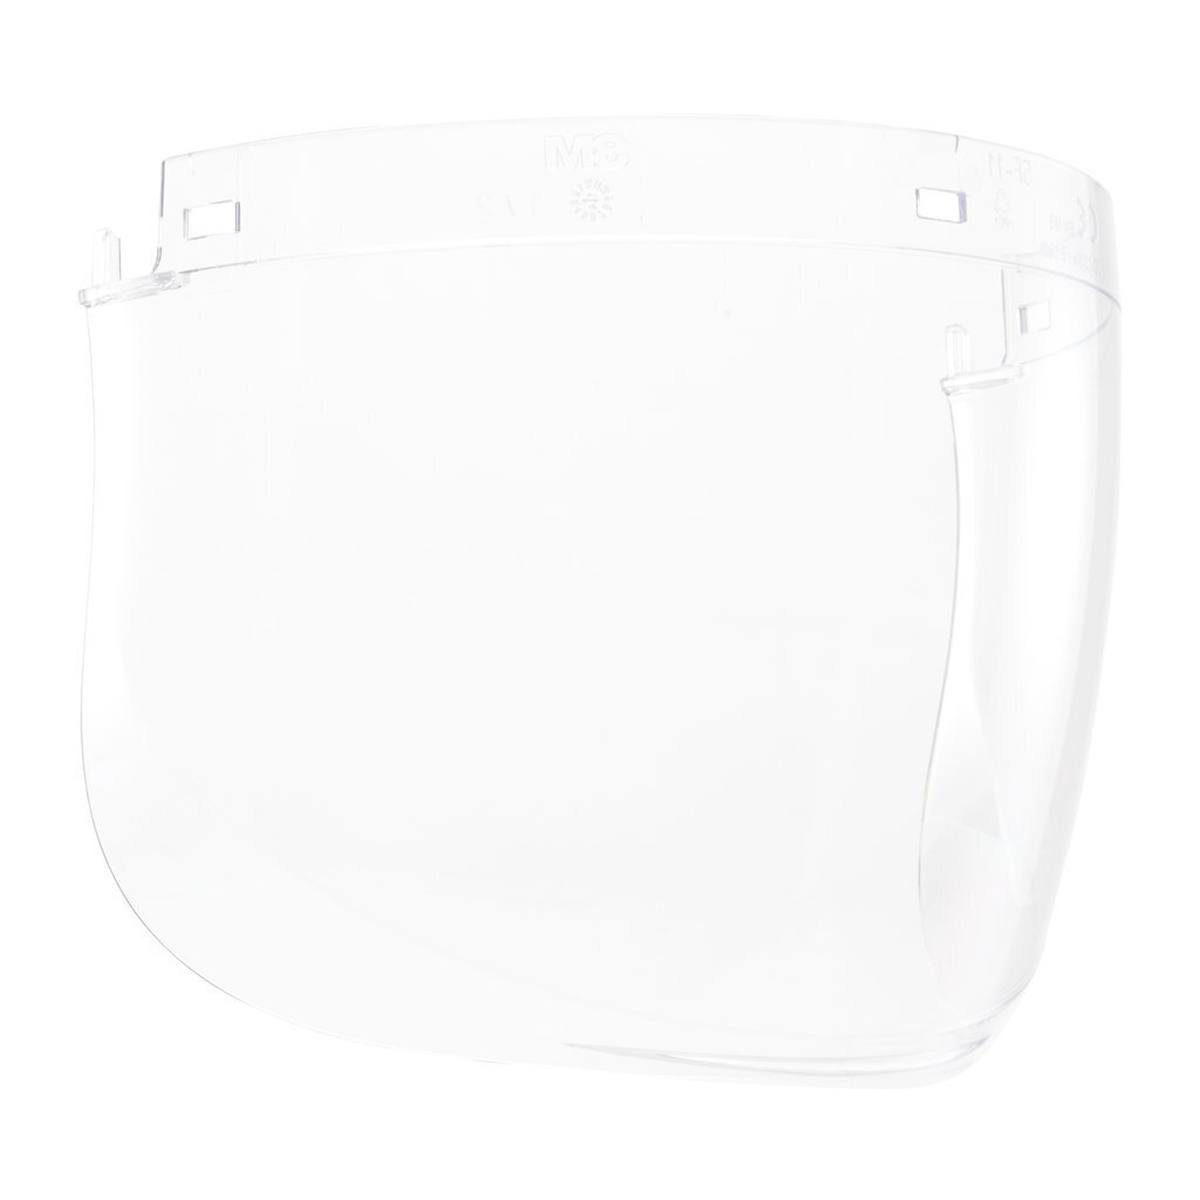 3M 5F-11 clear visor polycarbonate clear extremely impact-resistant thickness: 1.5mm, weight: 138g available separately: V5 holder for 3M safety helmets